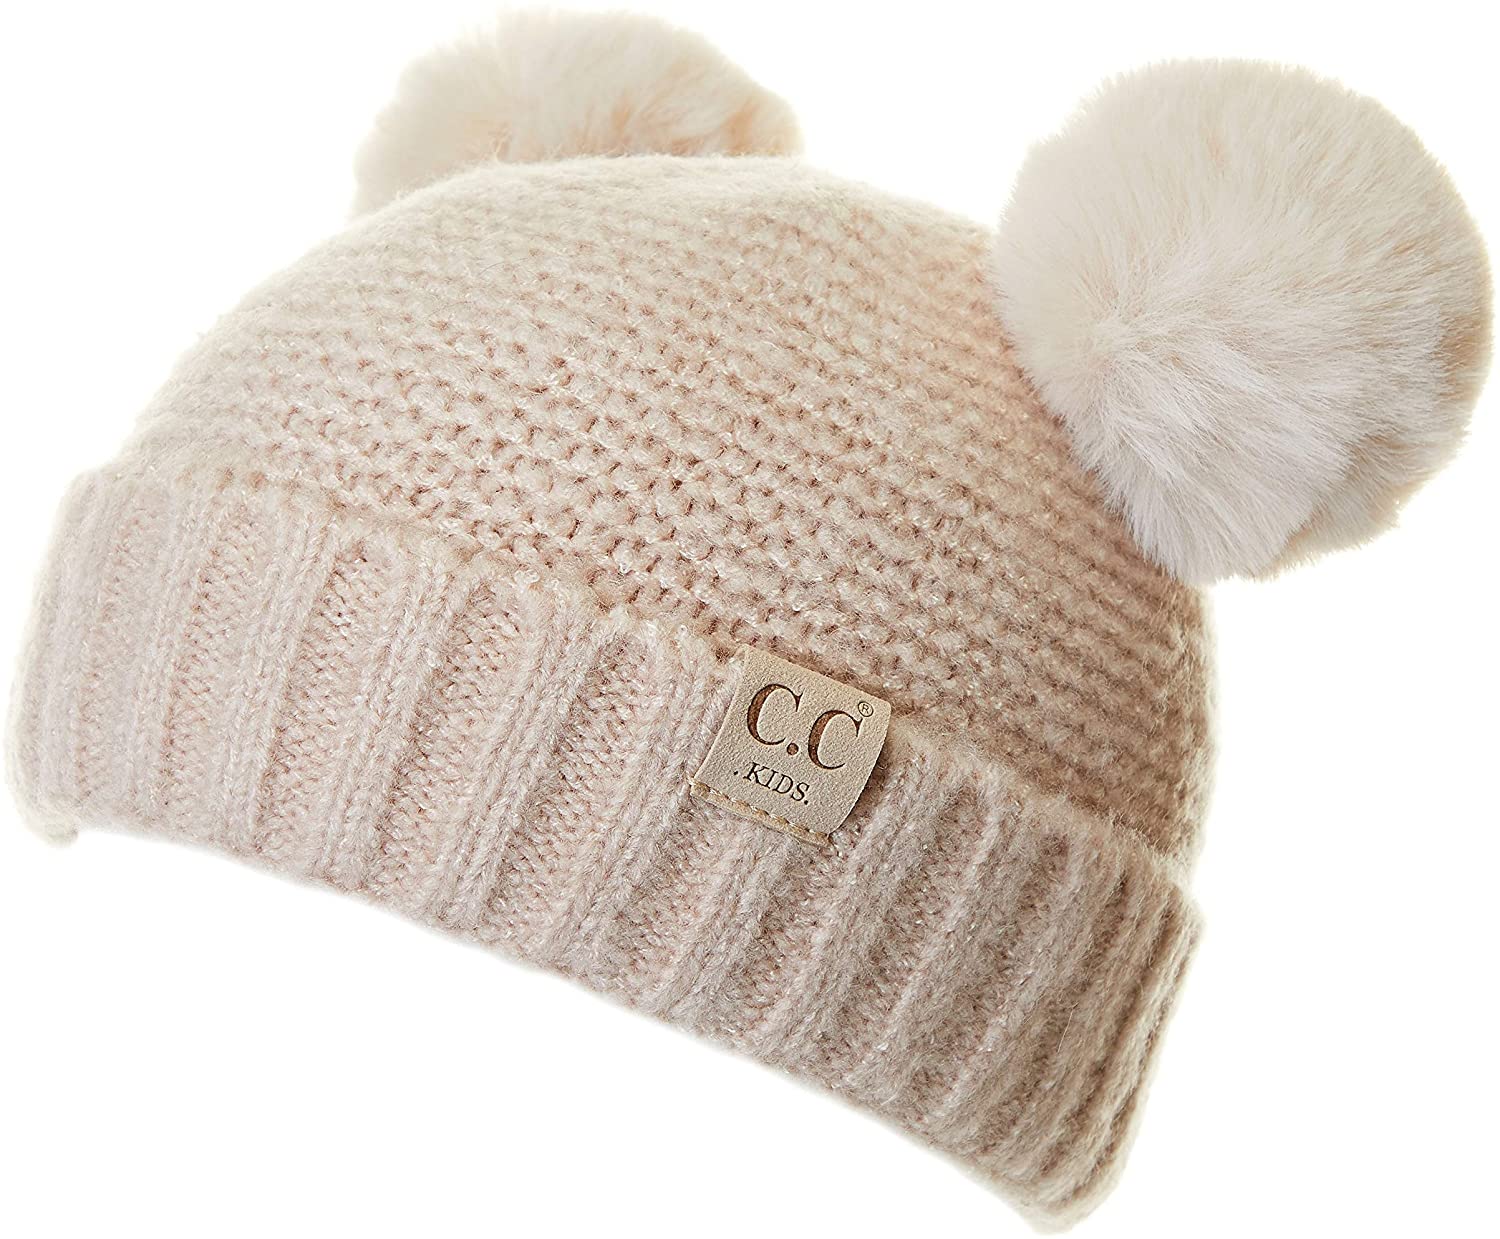 C.C Exclusives Children Kid Double Pompom Knitted Beanie for Kids Ages 2-5 KIDS-2055 KID-24 KID-23